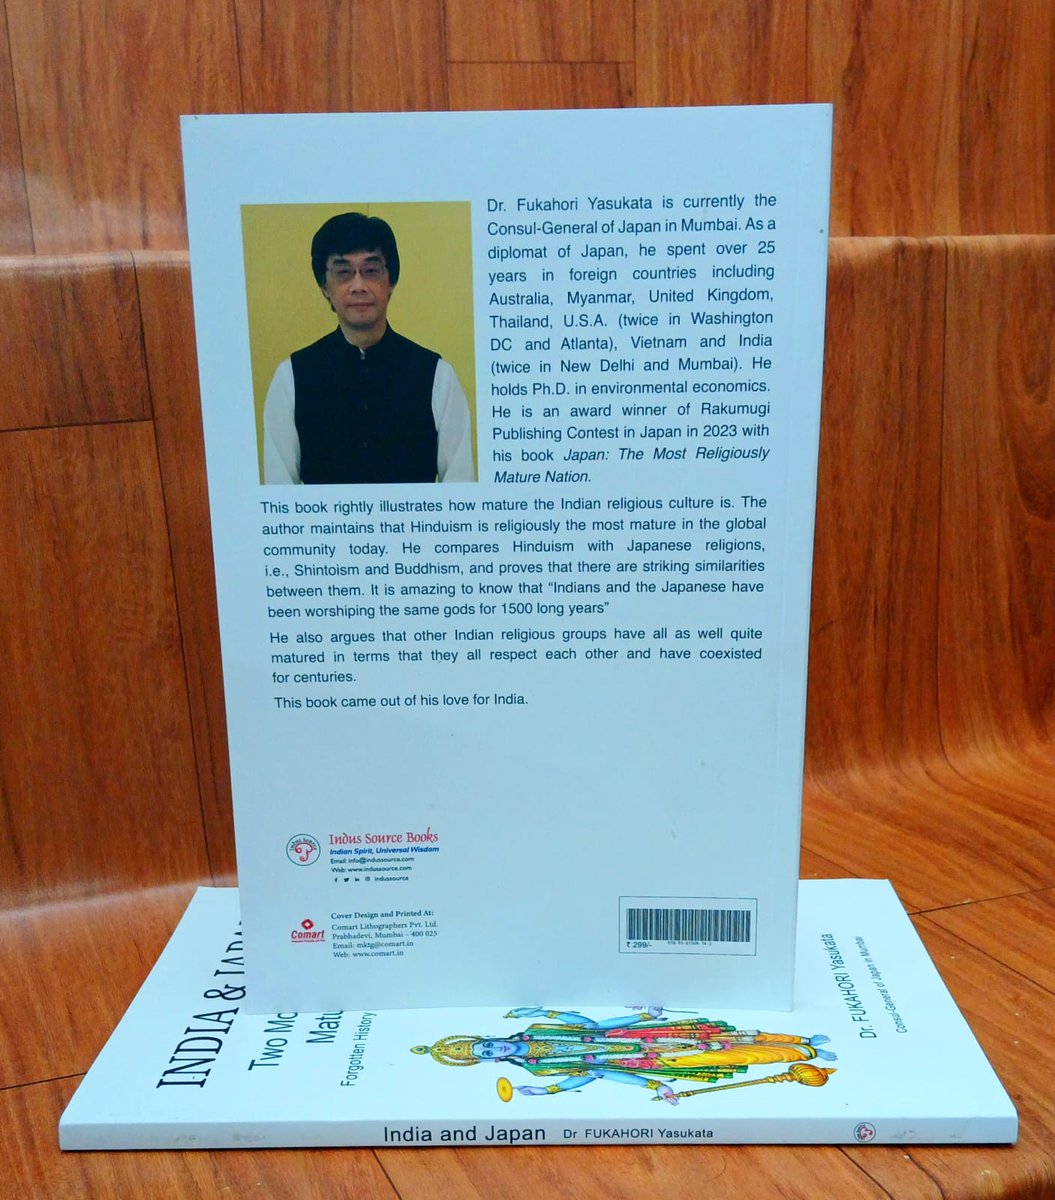 #NewBookAlert. Flat 25% Discount. Presenting the much acclaimed Book: India & Japan Two Most Religiously Mature Nation by Dr. Fukahori Yasukata (Consulate General of Japan in Mumbai - @CGOJMumbai), published by @indussource. #BuyFromPI Order👉padhegaindia.in/product/india-…